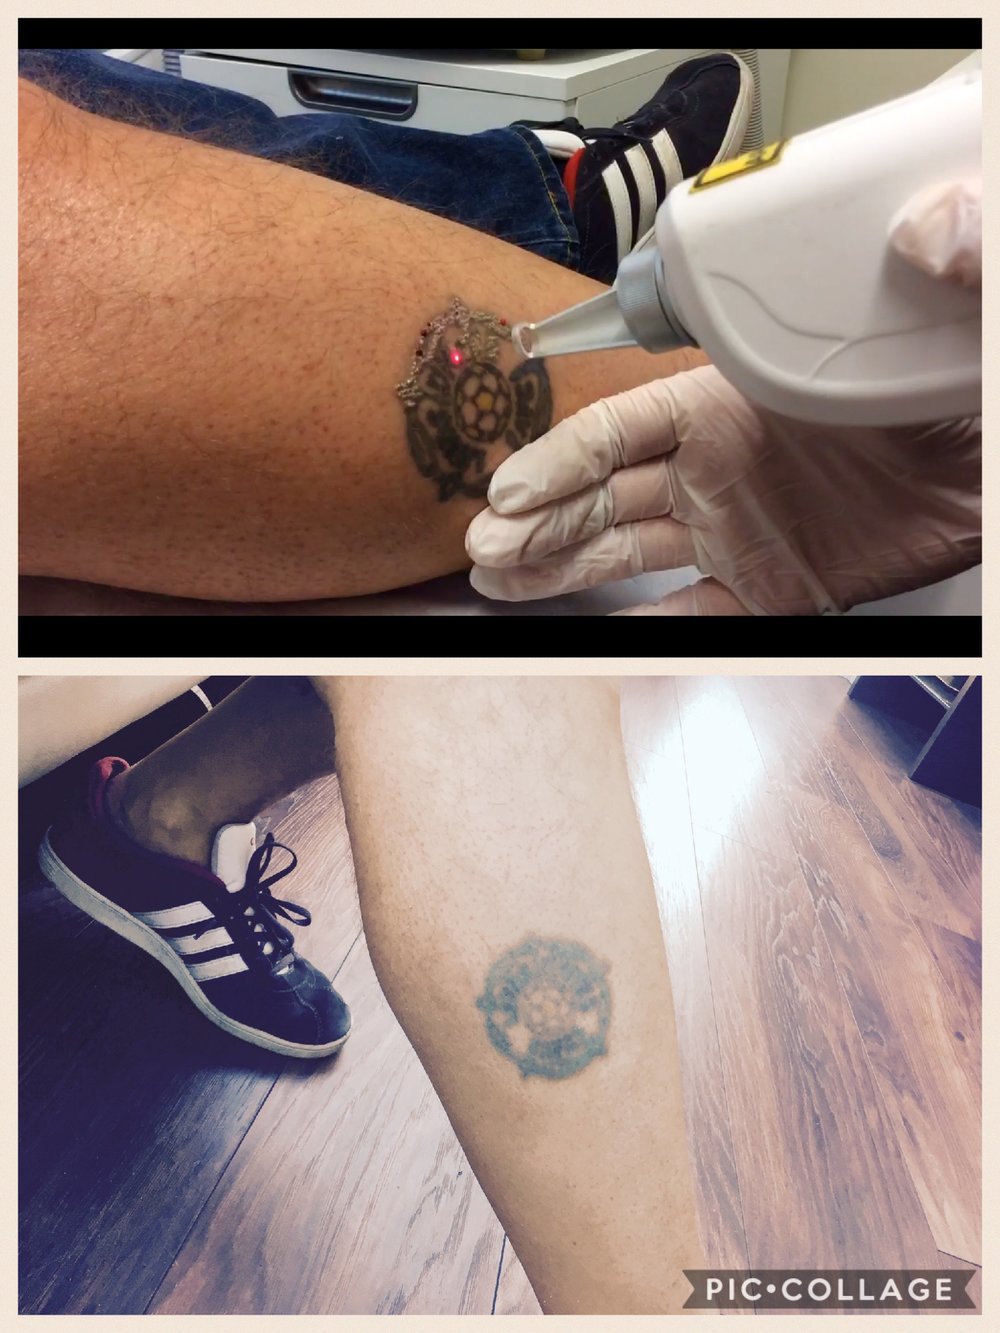 Pictures of tattoo removal today - Maria Patricia - Laser Tattoo Removal -  Laser Hair Removal - Carbon Laser - Skin Rejuvenation - Dermal Rollers